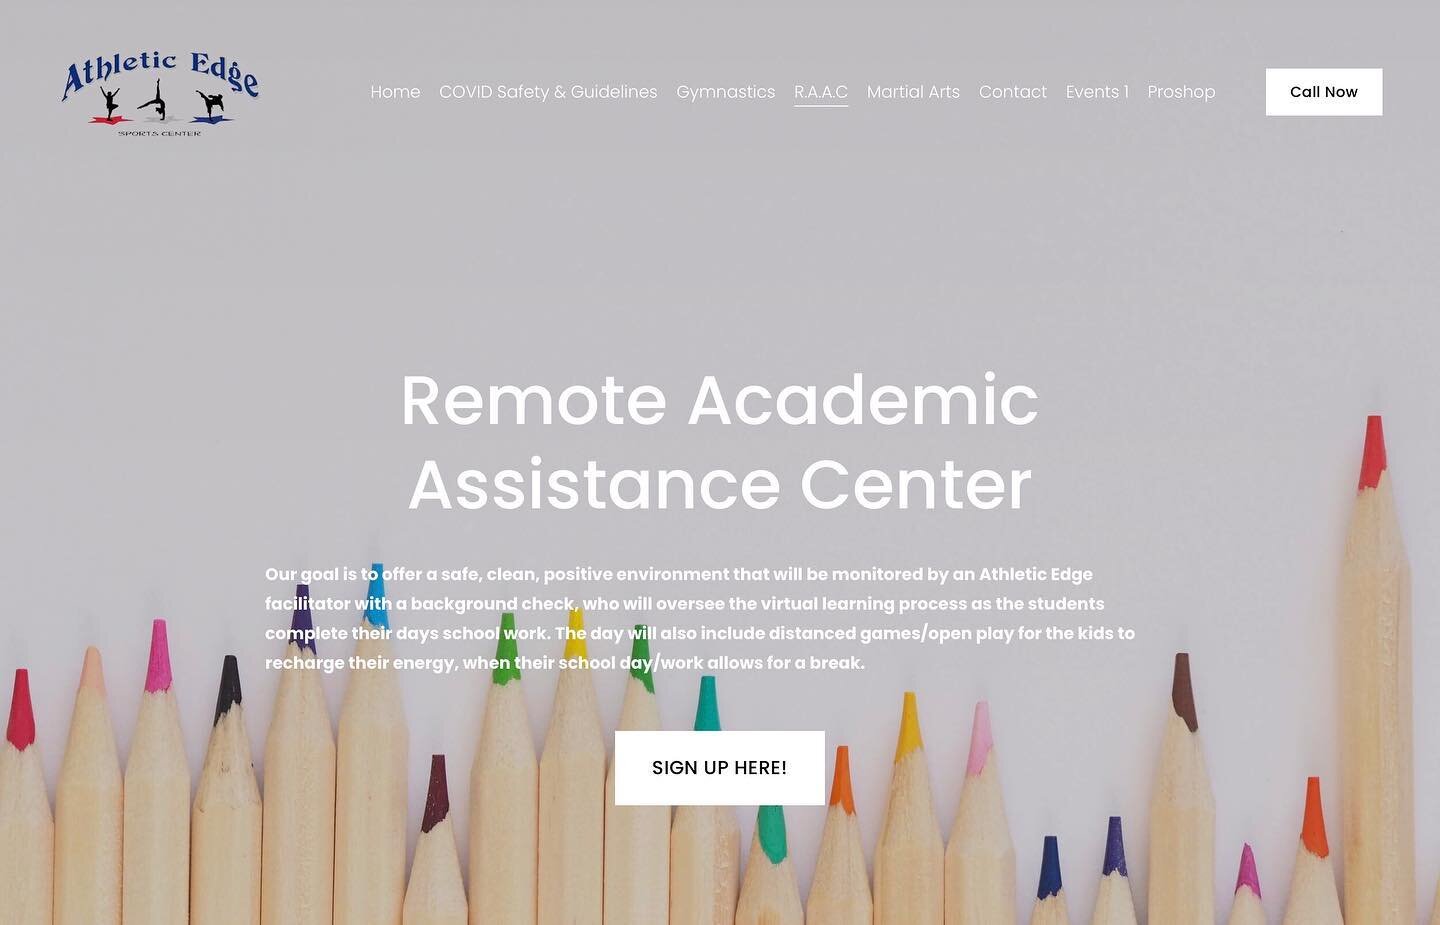 ⭐️We are now accepting registration for our Remote Academic Assistance Center here at Athletic Edge Sports Center! Head over to the R.A.A.C tab on our website, athleticedgeny.com to learn more, and click the &ldquo;Sign Up Here&rdquo; button to regis